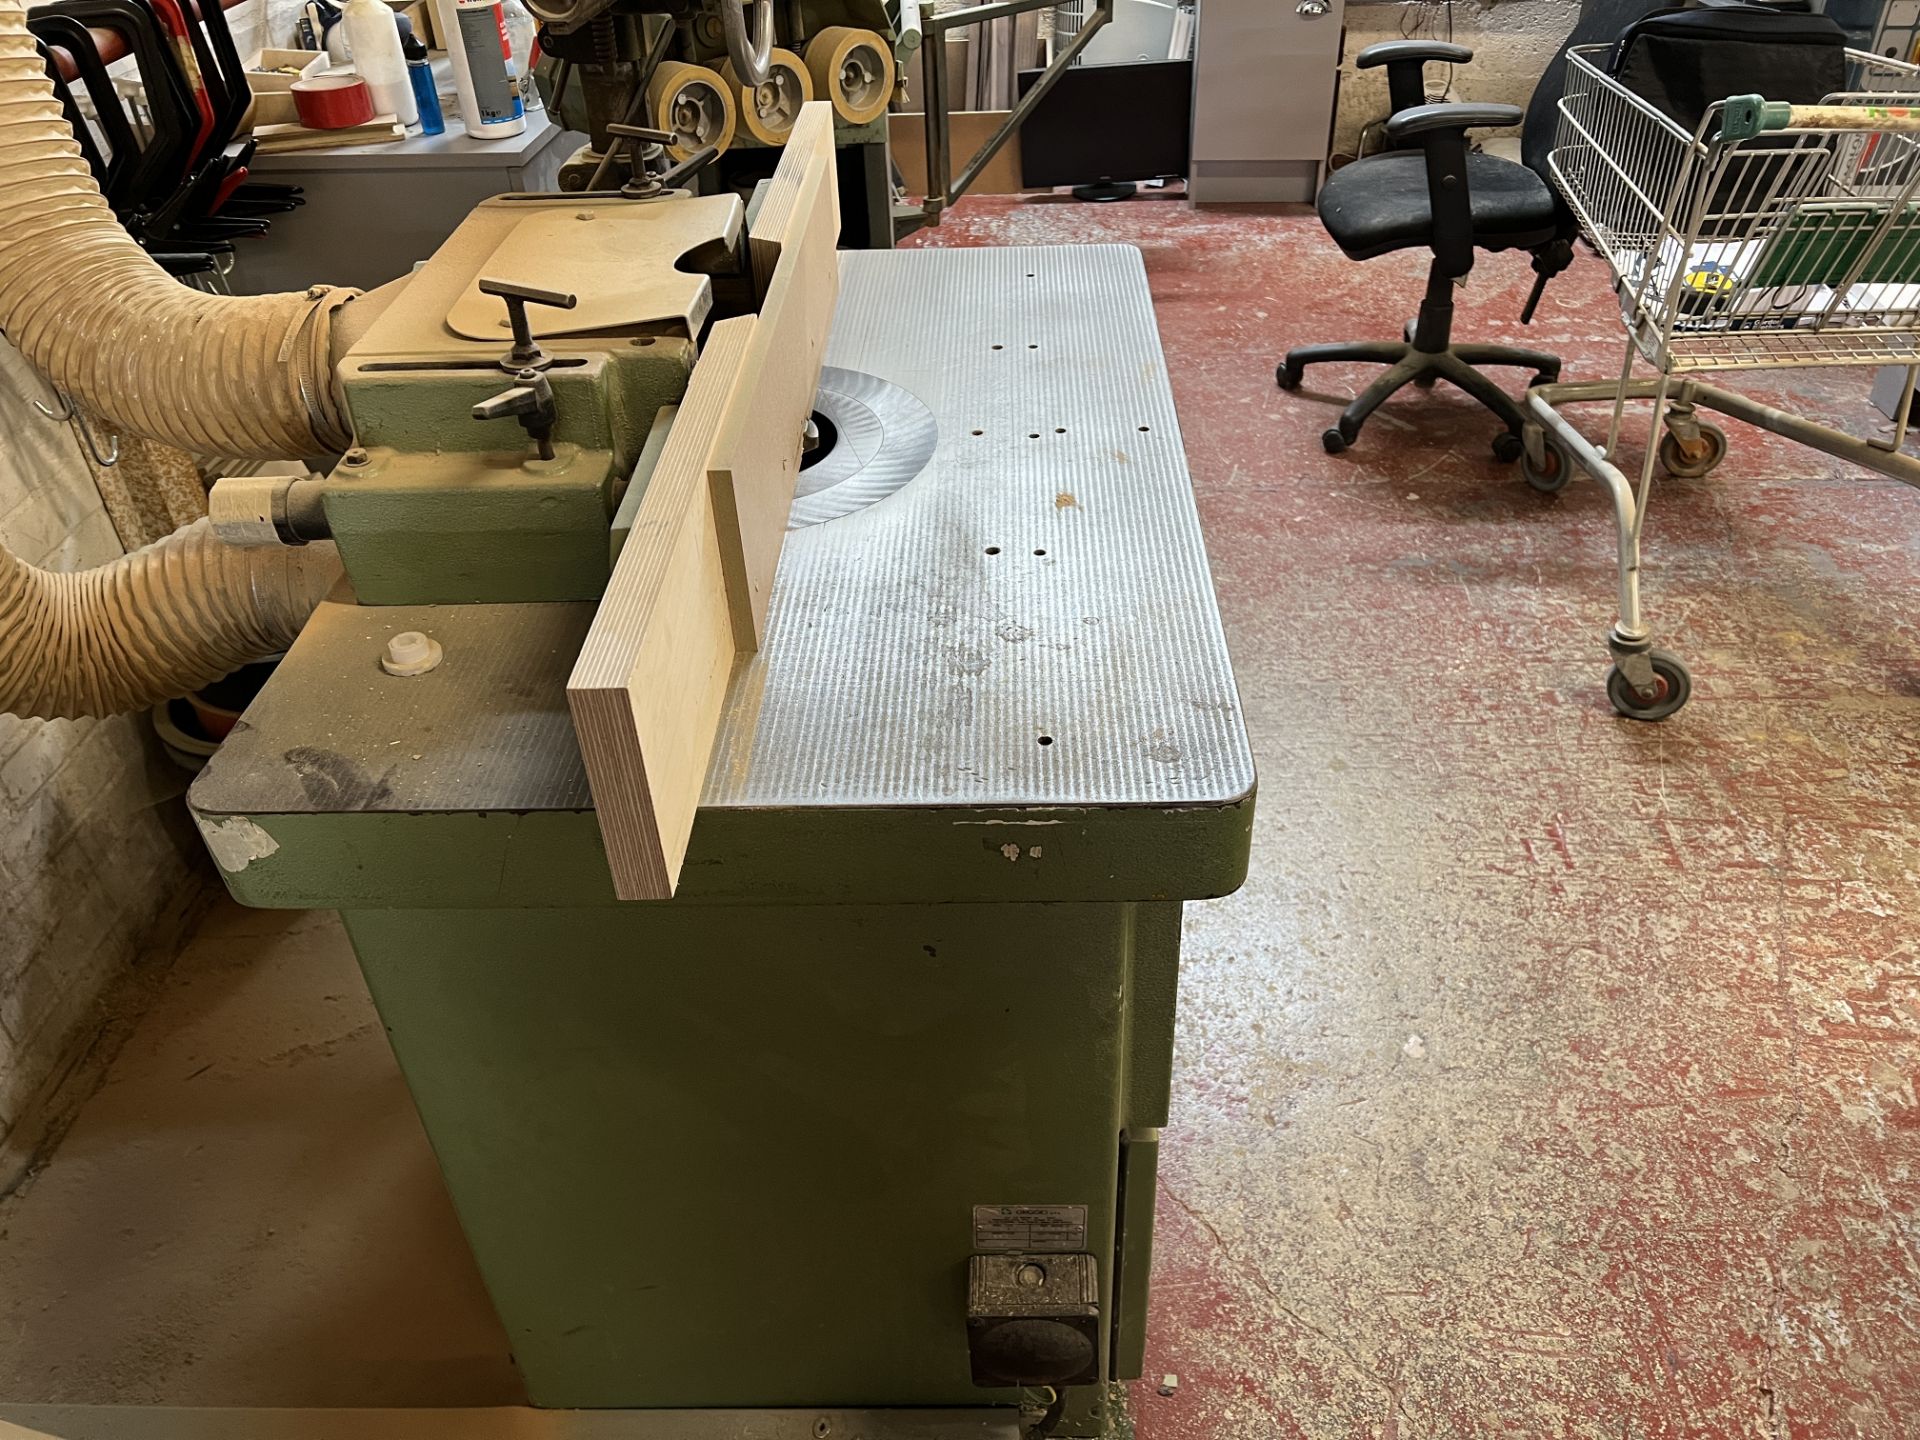 Griggio T100 spindle moulder, 1000mm x 640mm table fitted with Burgreen BLG-8 power feeder unit, S/ - Image 5 of 8